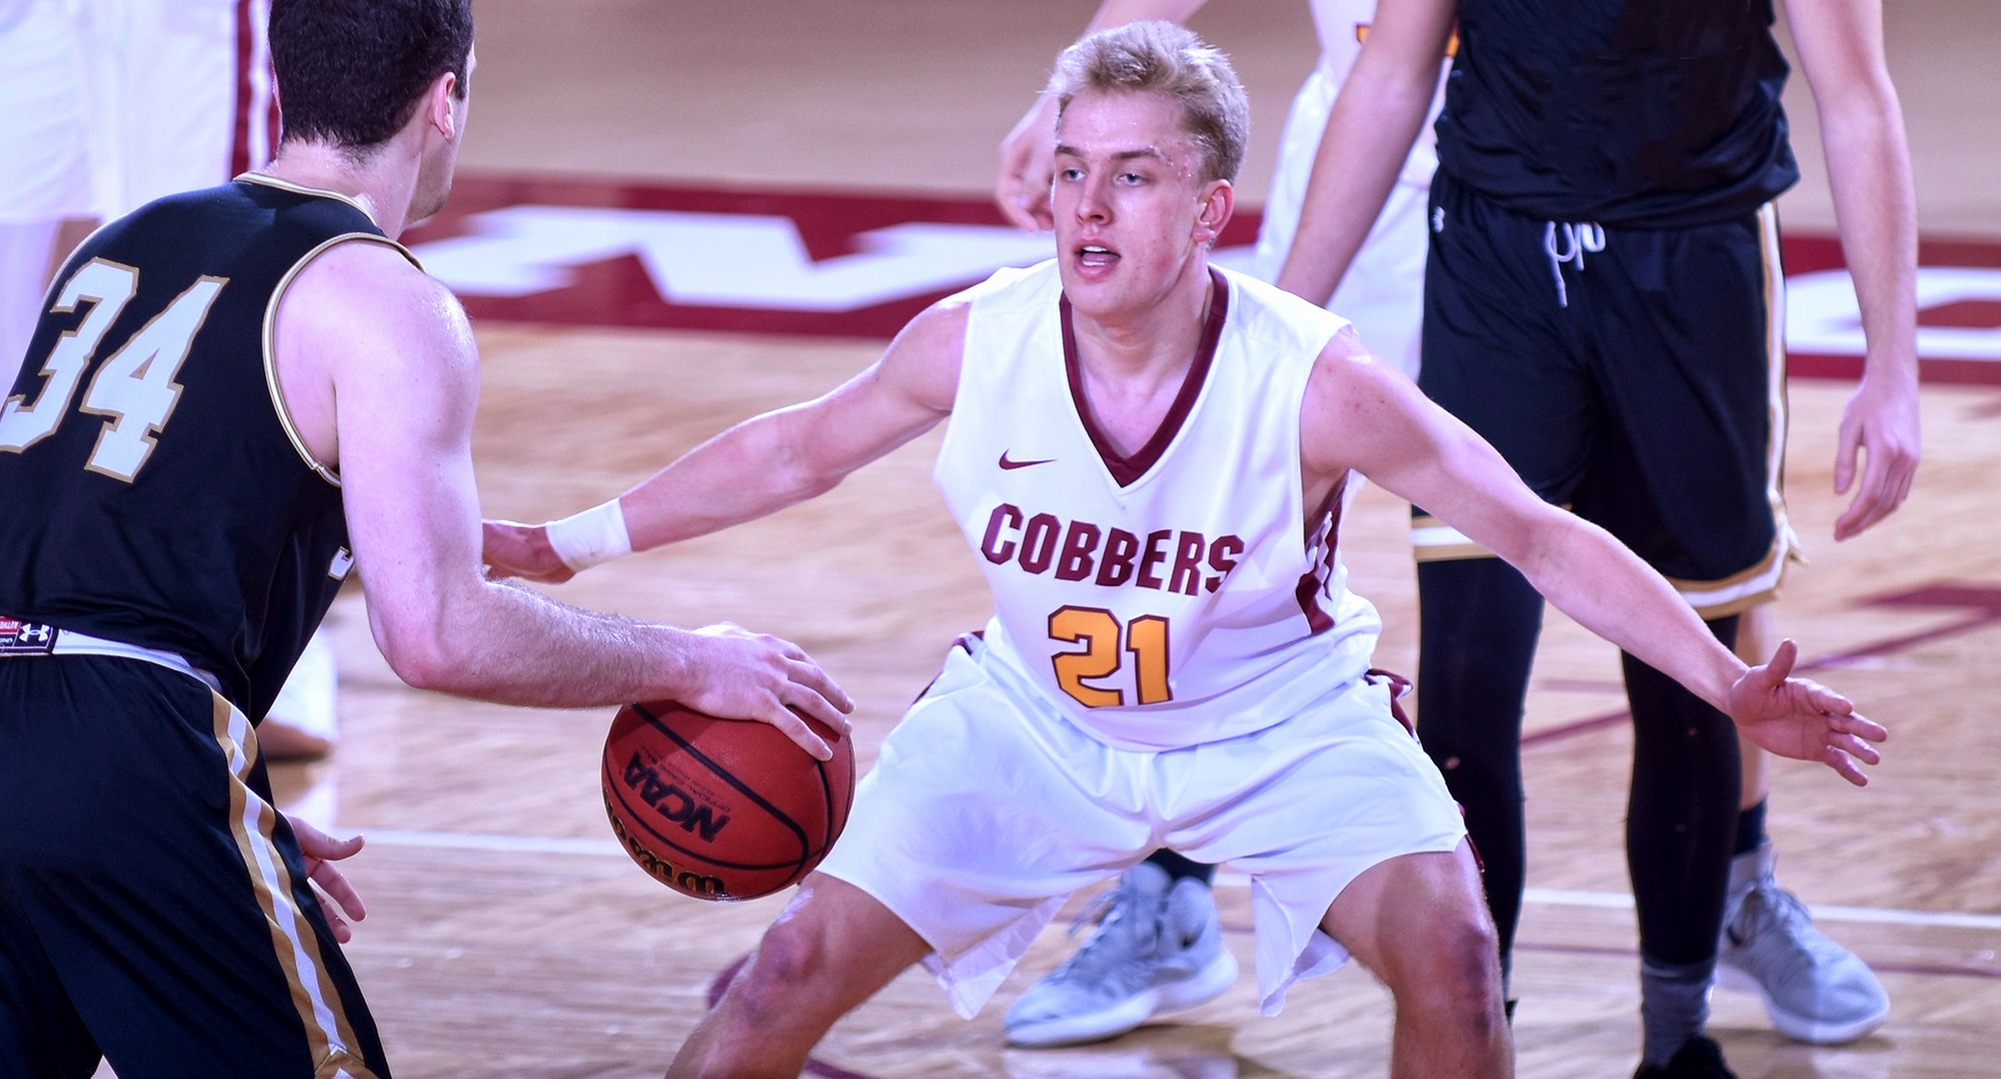 Sophomore David Birkeland scored a career-high 10 points and didn't miss a shot in the Cobbers' game at #4 St. Thomas.